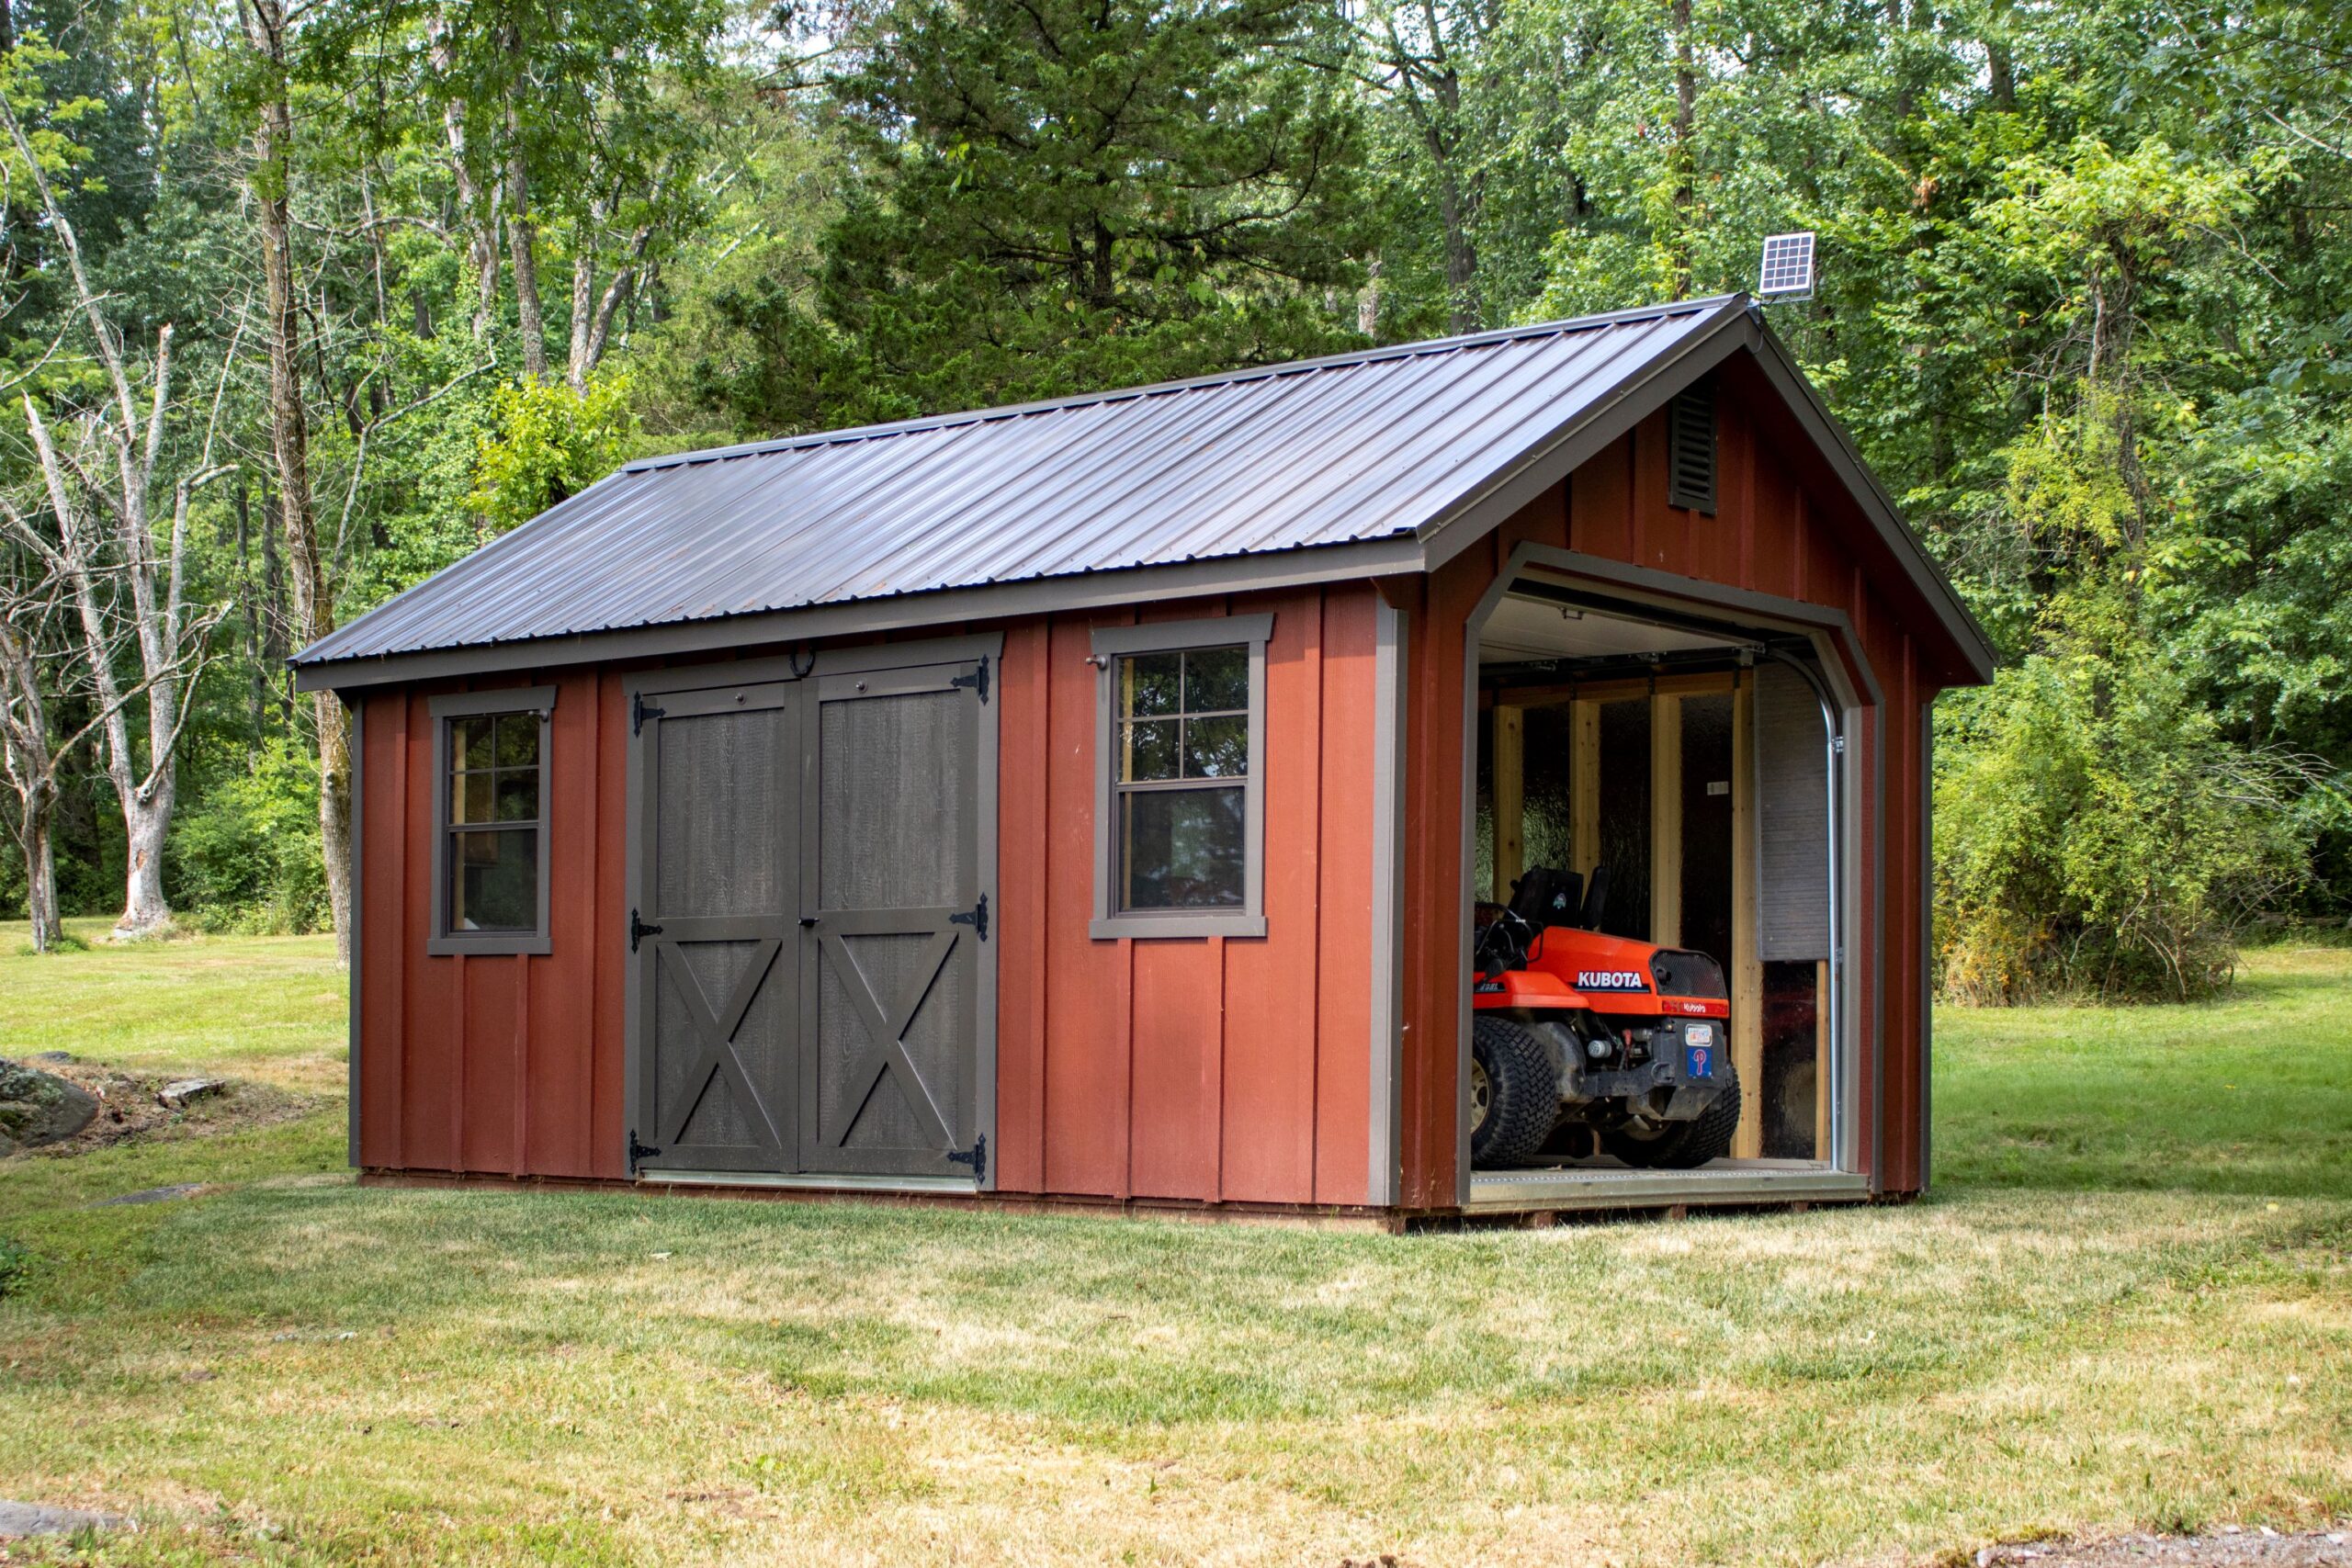 Exterior of a 1-story, 1-car Garden Shed Garage with red siding.